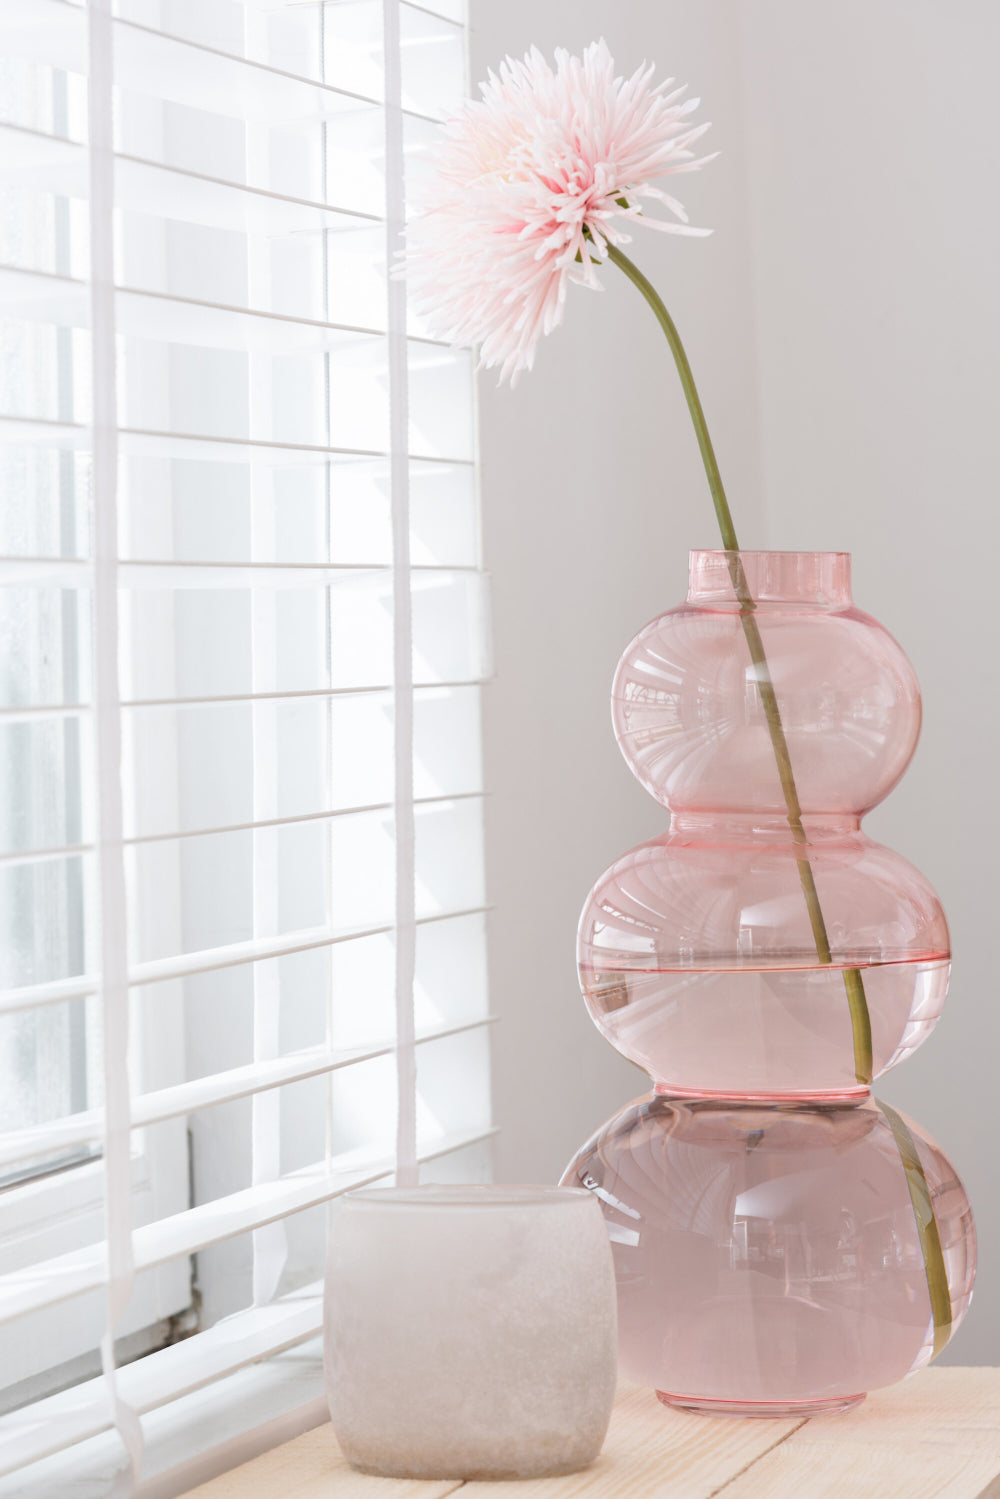 Glass Globe Shaped Large Vase in Pink Finish with Table in Living Room Setting 2